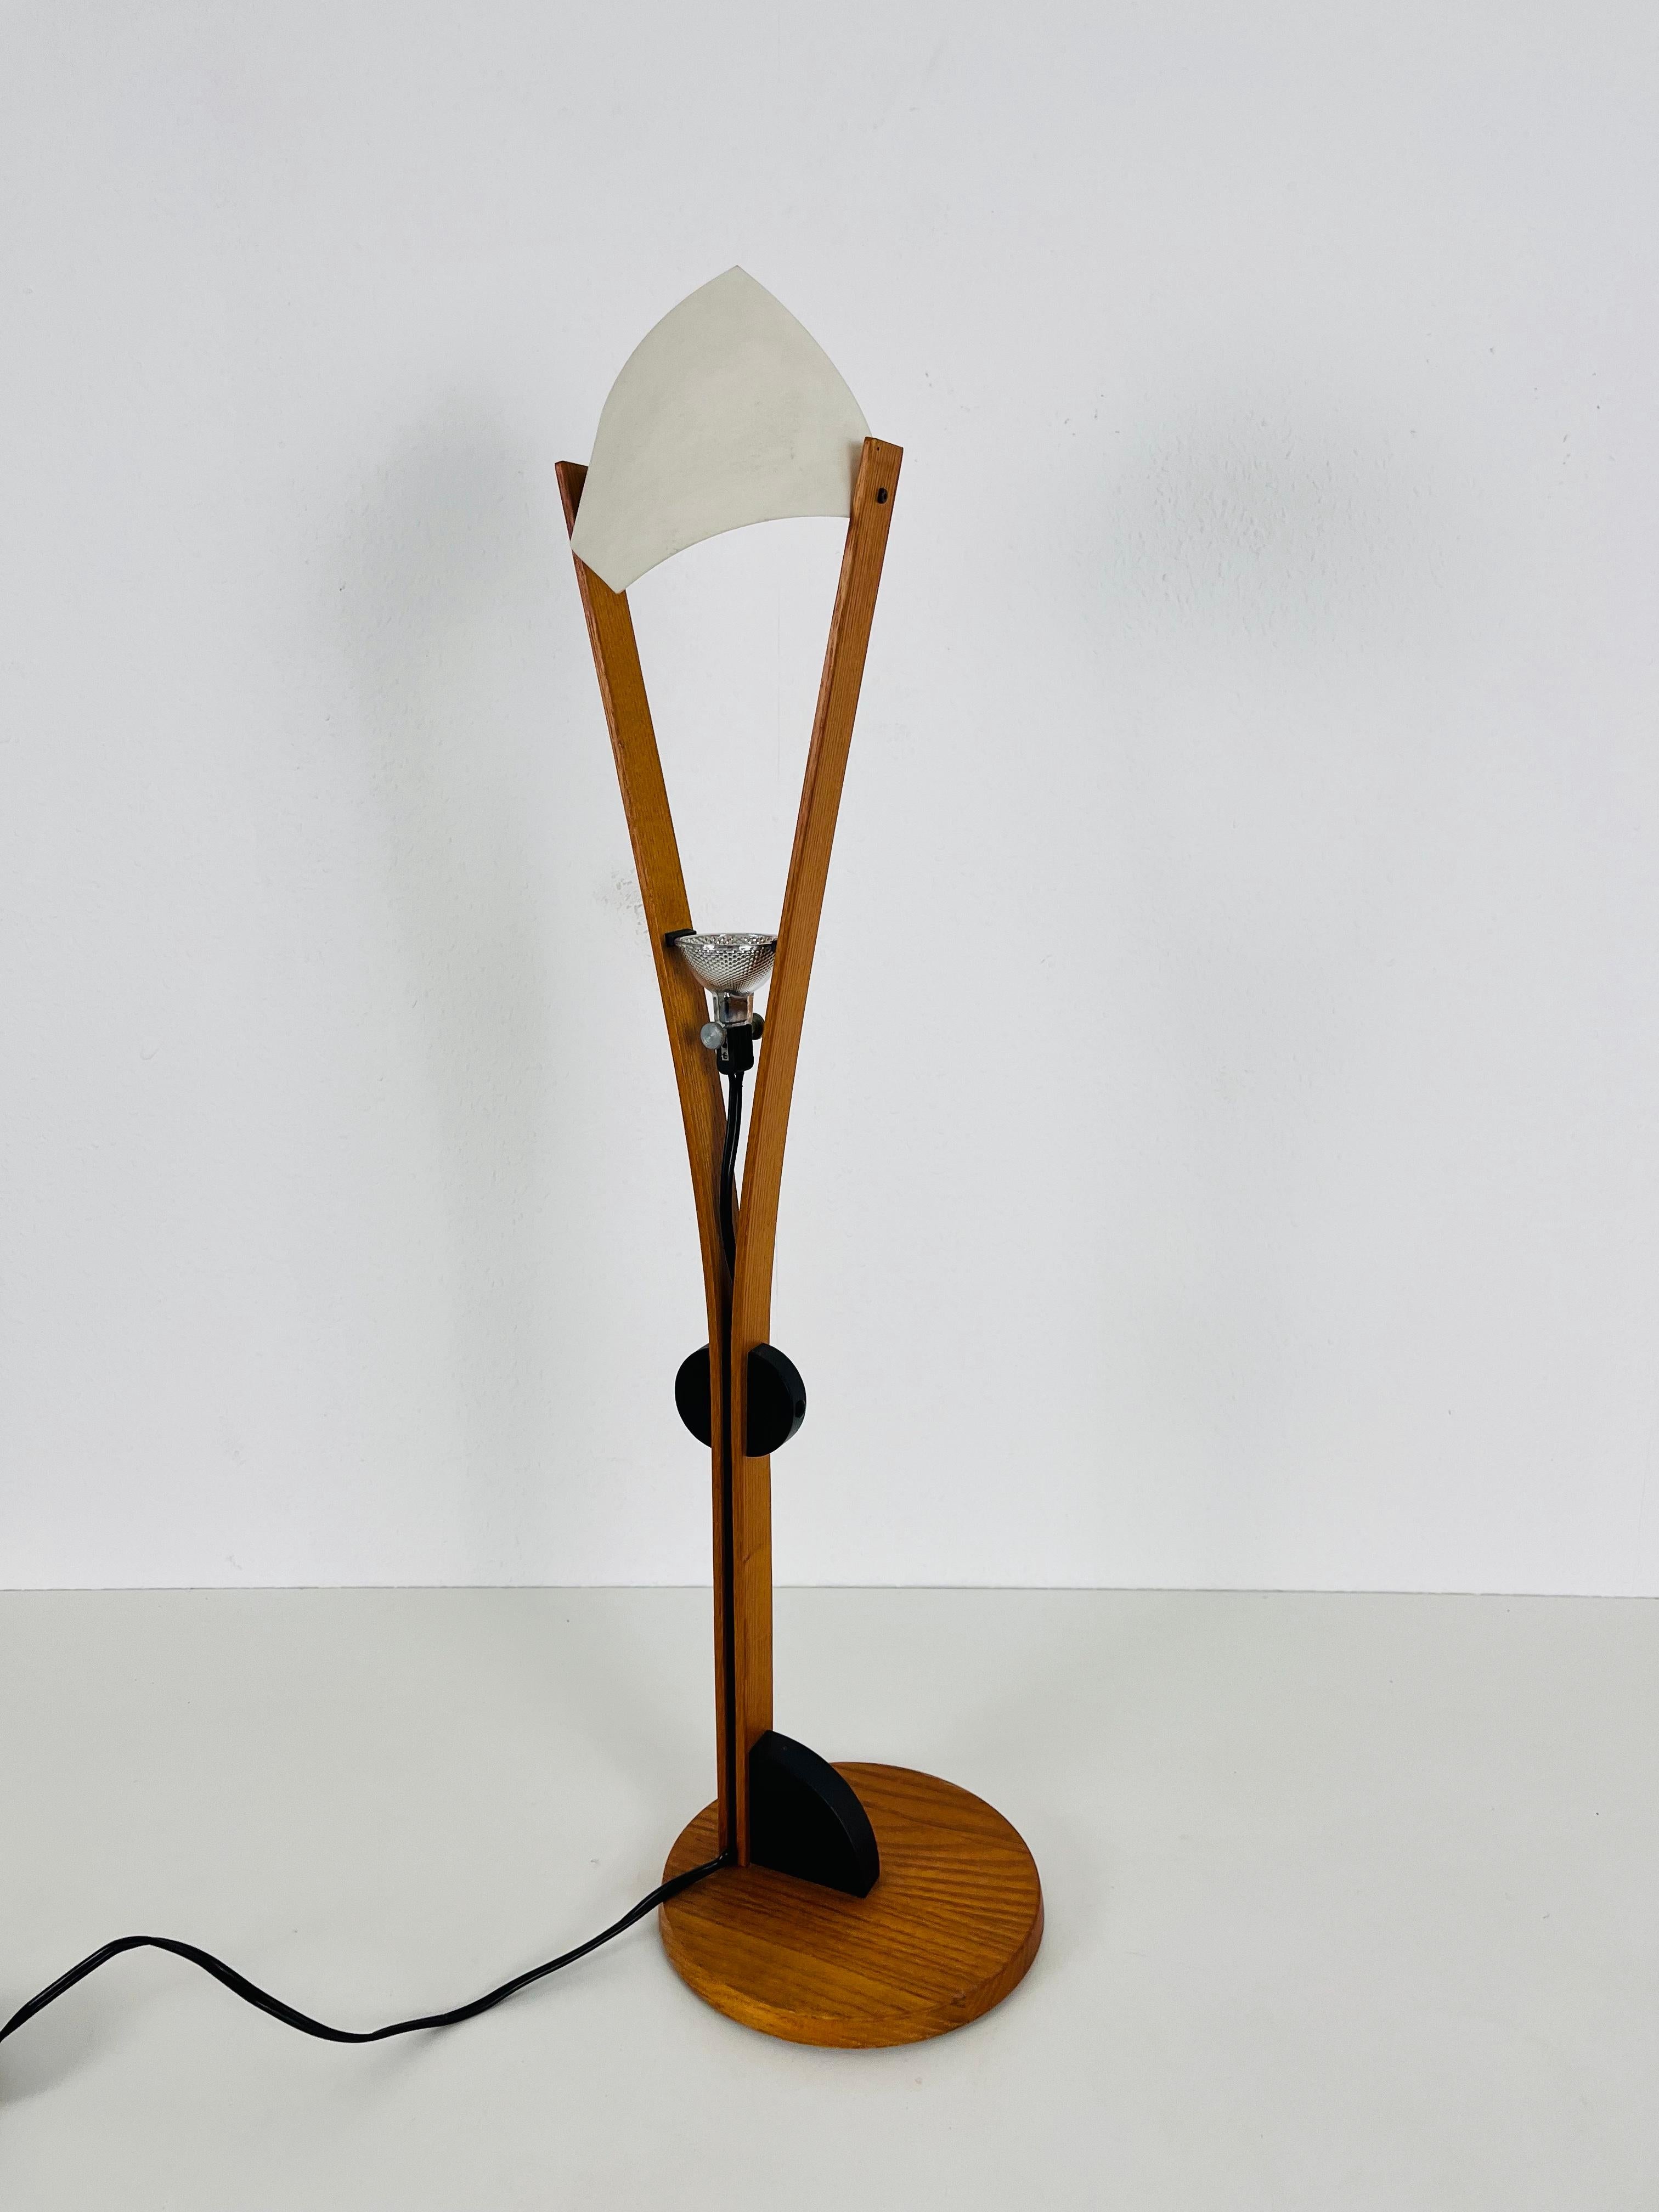 A wooden table lamp by Domus made in the 1960s. The body of the lamp is wood. The lamp has a typical Scandinavian design. The light bulb is dimmable with the black regulator.

Very good vintage condition. Works with both 120/220V.

Free